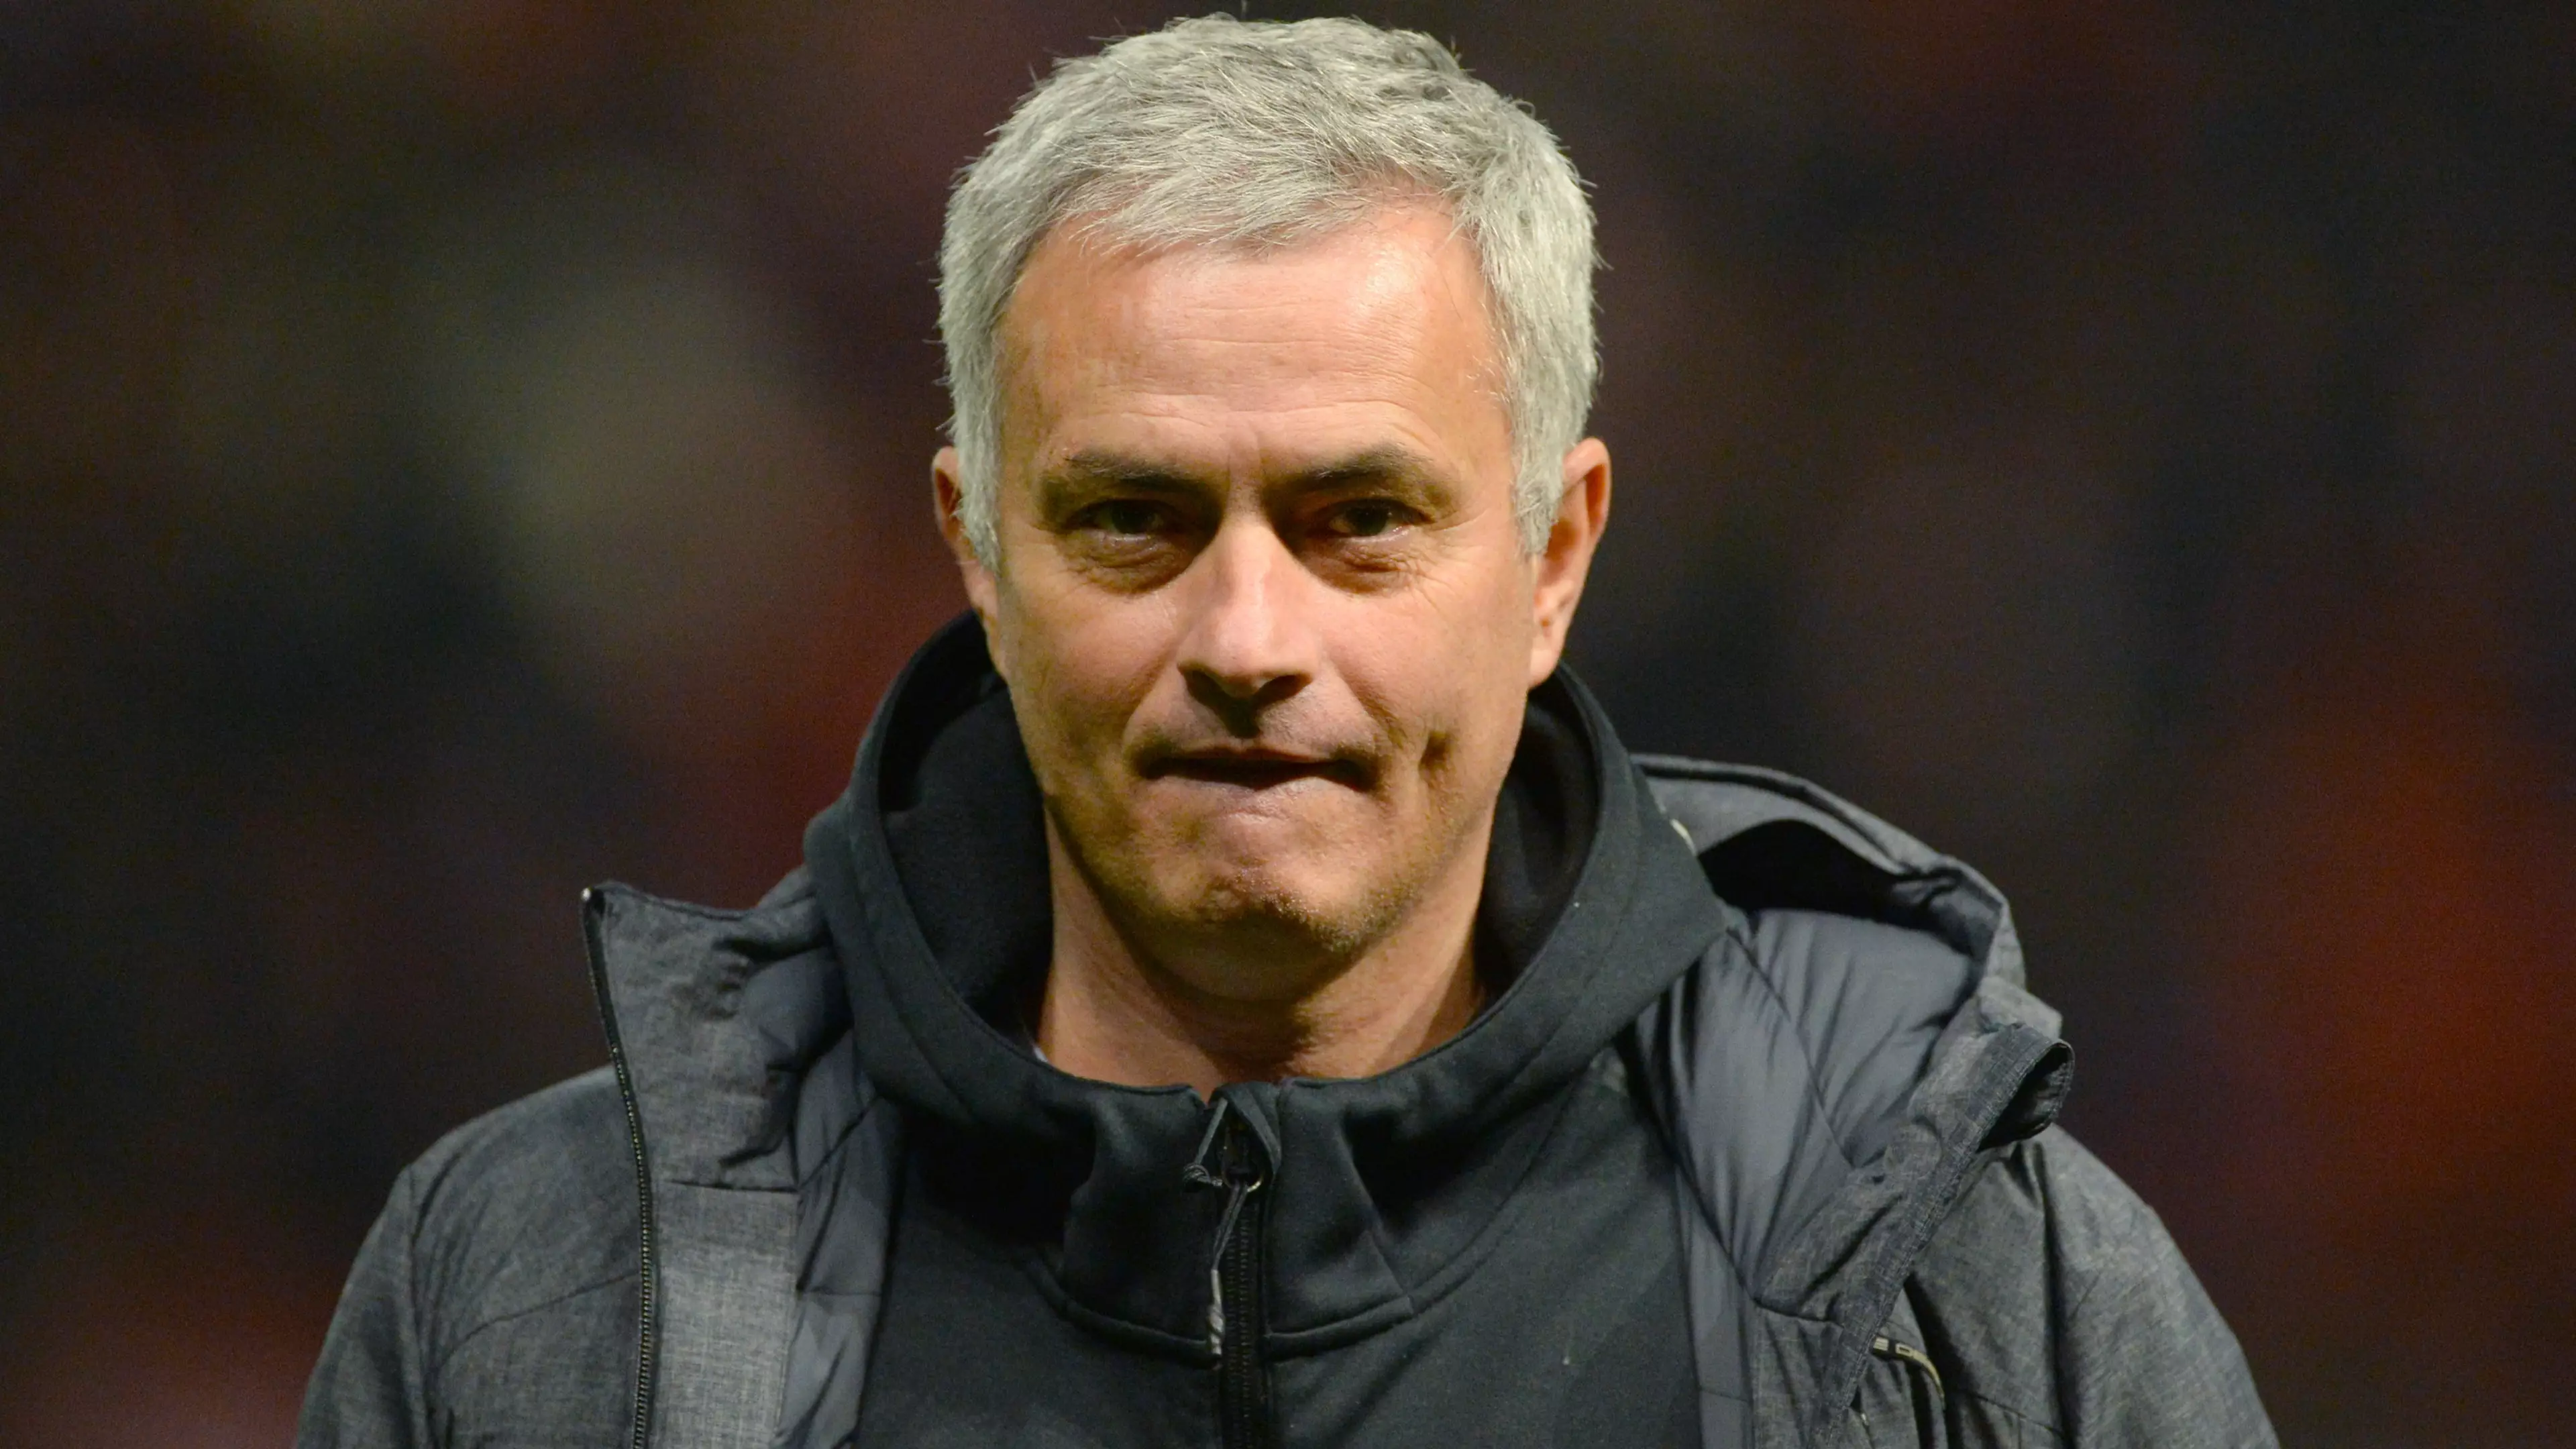 Jose Mourinho Adds One Of Europe's Top Prospects To His Christmas List